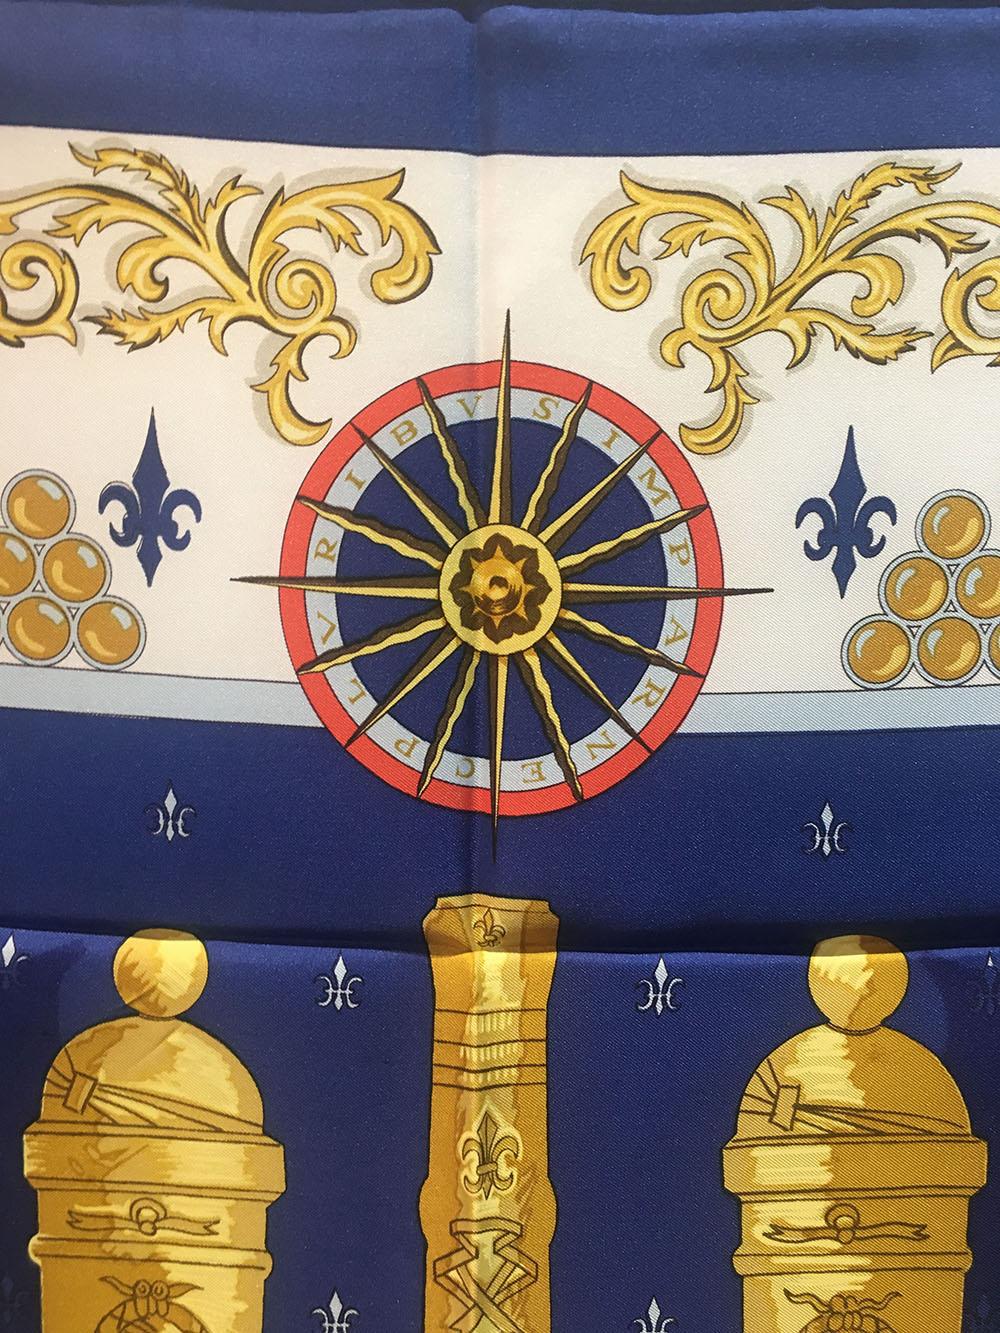 RARE Hermes Vintage Le Canon Du Soleil Royal Silk Scarf in Navy in excellent condition. Original silk screen design by Pierre Peron features a centered artistic rendering of 5 golden embellished canons over a navy blue background surrounded by a